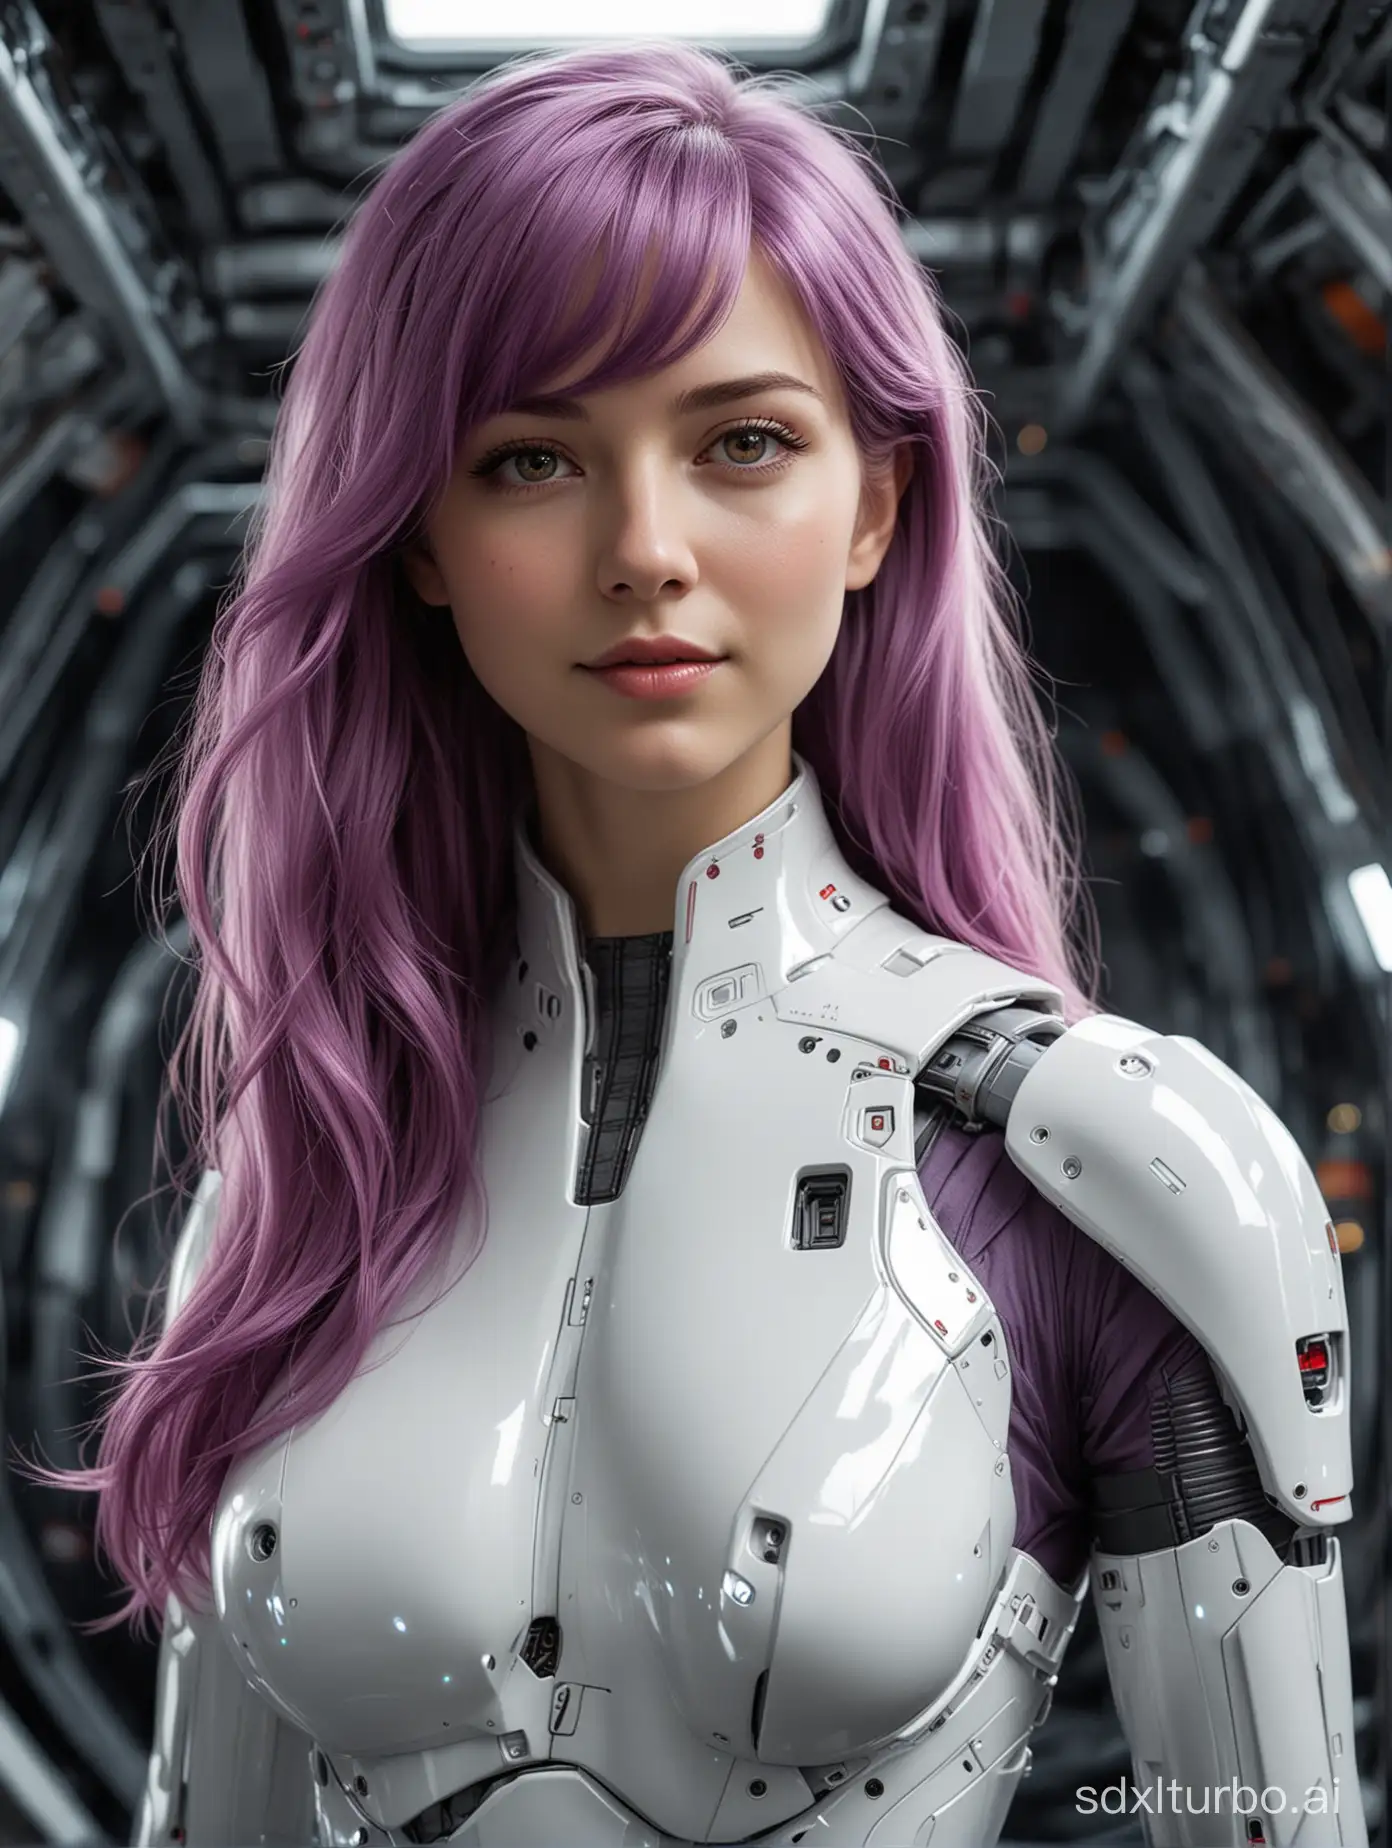 In the vast expanse of deep space, aboard a formidable warship, a petite android stands upon the deck, her figure a mesmerizing blend of sleek machinery and graceful femininity. From the neck down, she is predominantly mechanical, her form encased in white plasteel armor with striking red accents emitting a subtle glow, seamlessly integrating with her human-like features.

Long silky mauve hair cascades down the length of her back, stylish bangs framing her youthful, yet remarkably detailed, android face. With delicate sensors mimicking human expressions, she wears a wide grin as she gazes out into the infinite abyss beyond the viewport.

Her eyes, a captivating shade of purple, gleam with a hint of artificial luminescence, reflecting the distant stars that dot the cosmos. In this moment, she is the embodiment of freedom, a testament to the boundless possibilities that await those who dare to explore the depths of space and the uncharted territories that lie beyond.